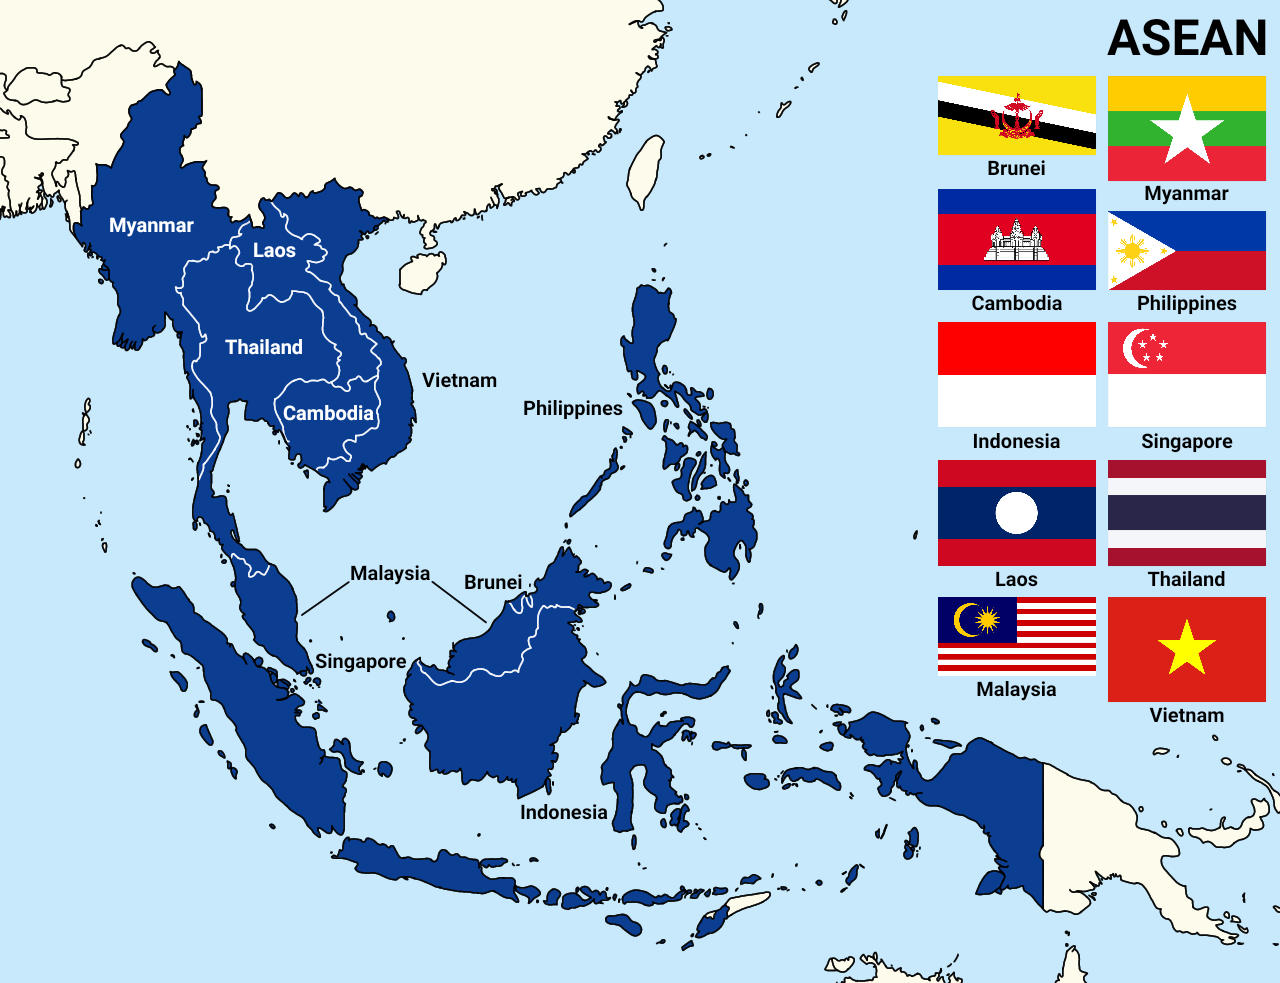 42nd ASEAN Summit begins in Indonesia with focus on becoming global growth center_50.1